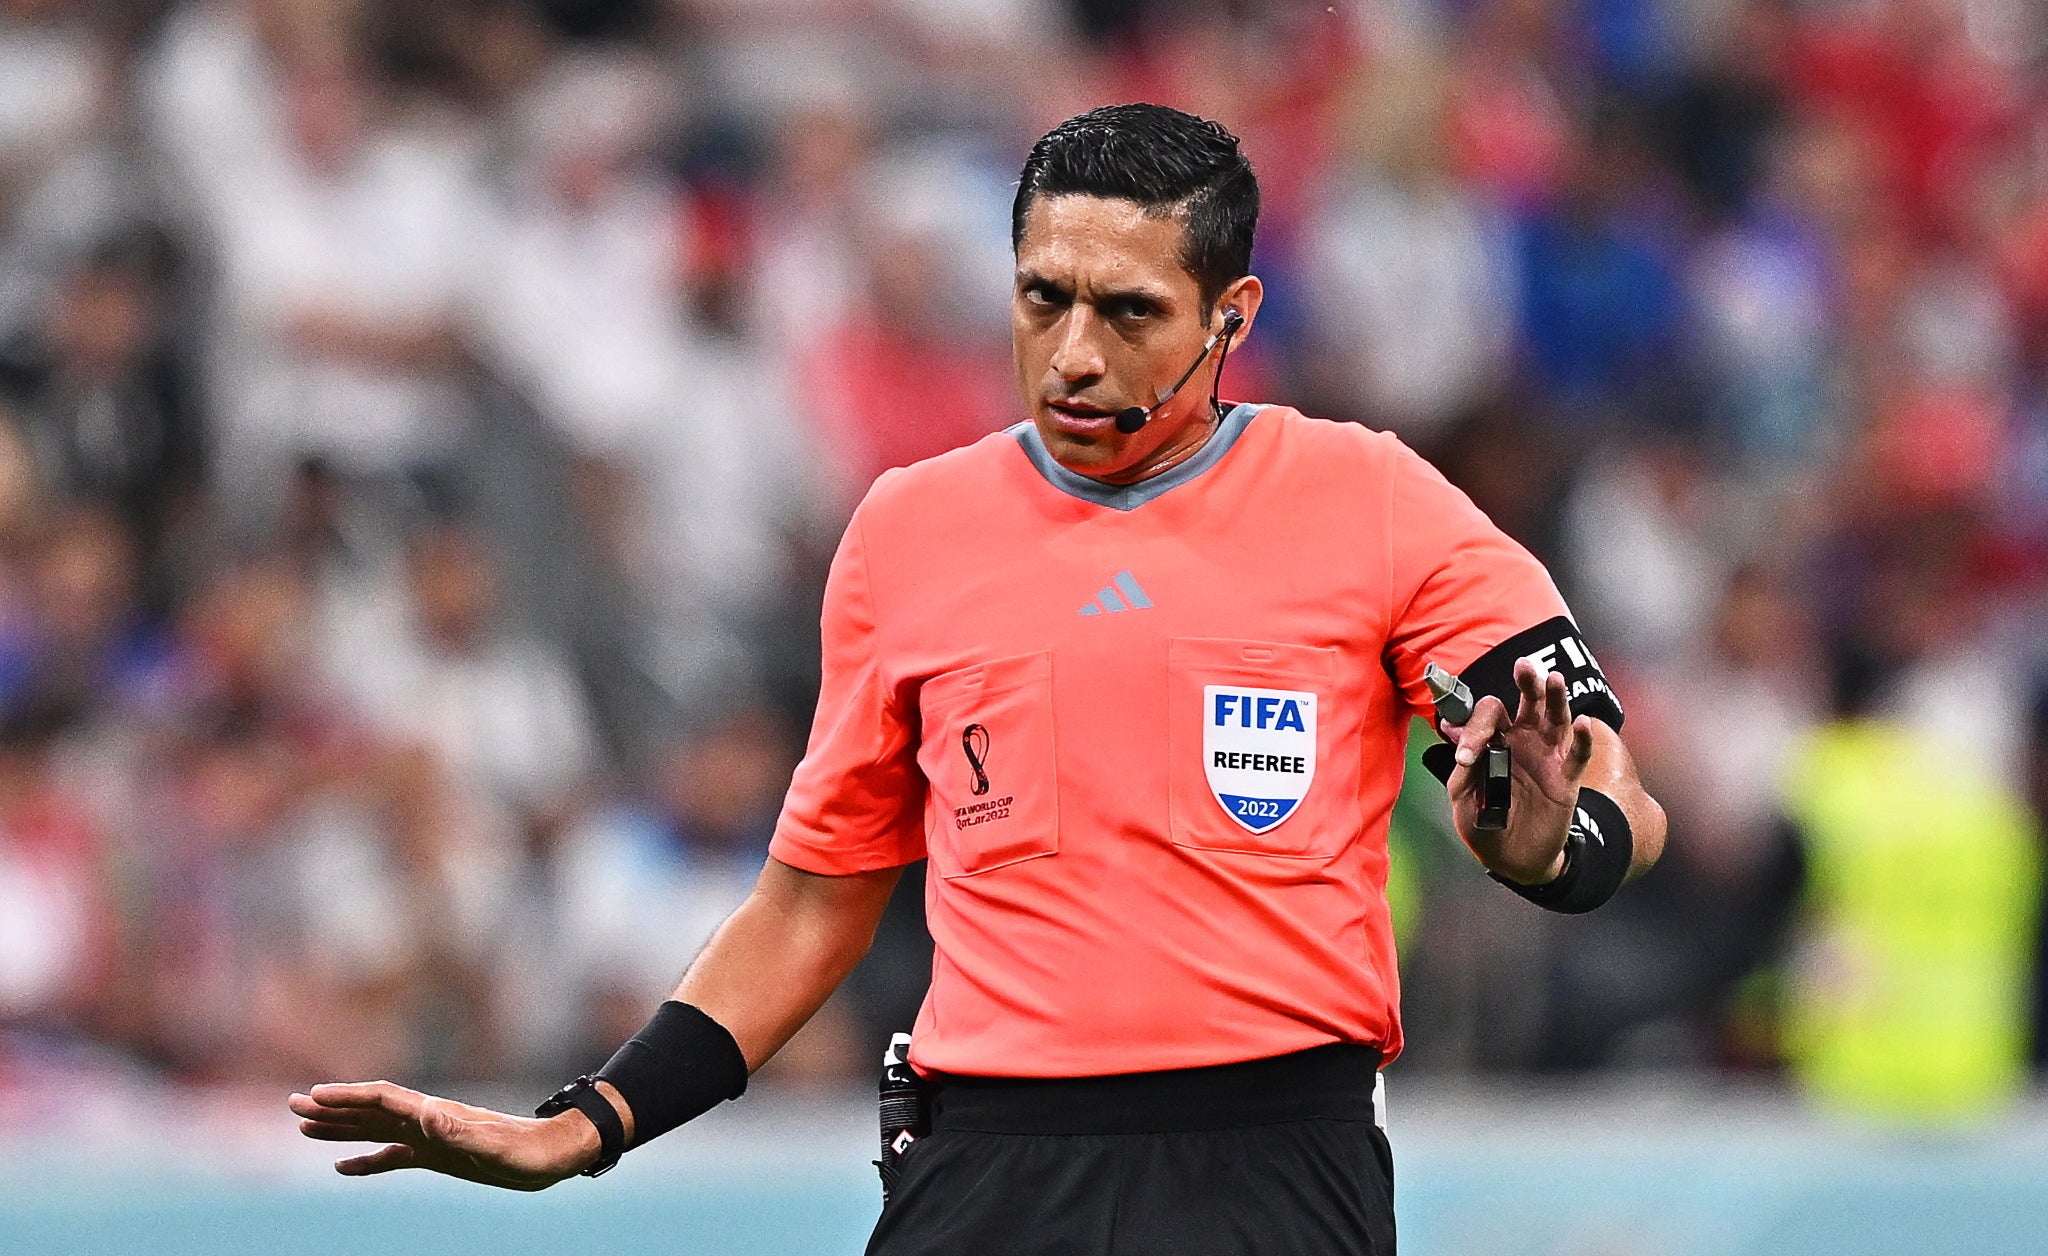 England vs USA referee Who is World Cup 2022 official Jesus Valenzuela? The Independent